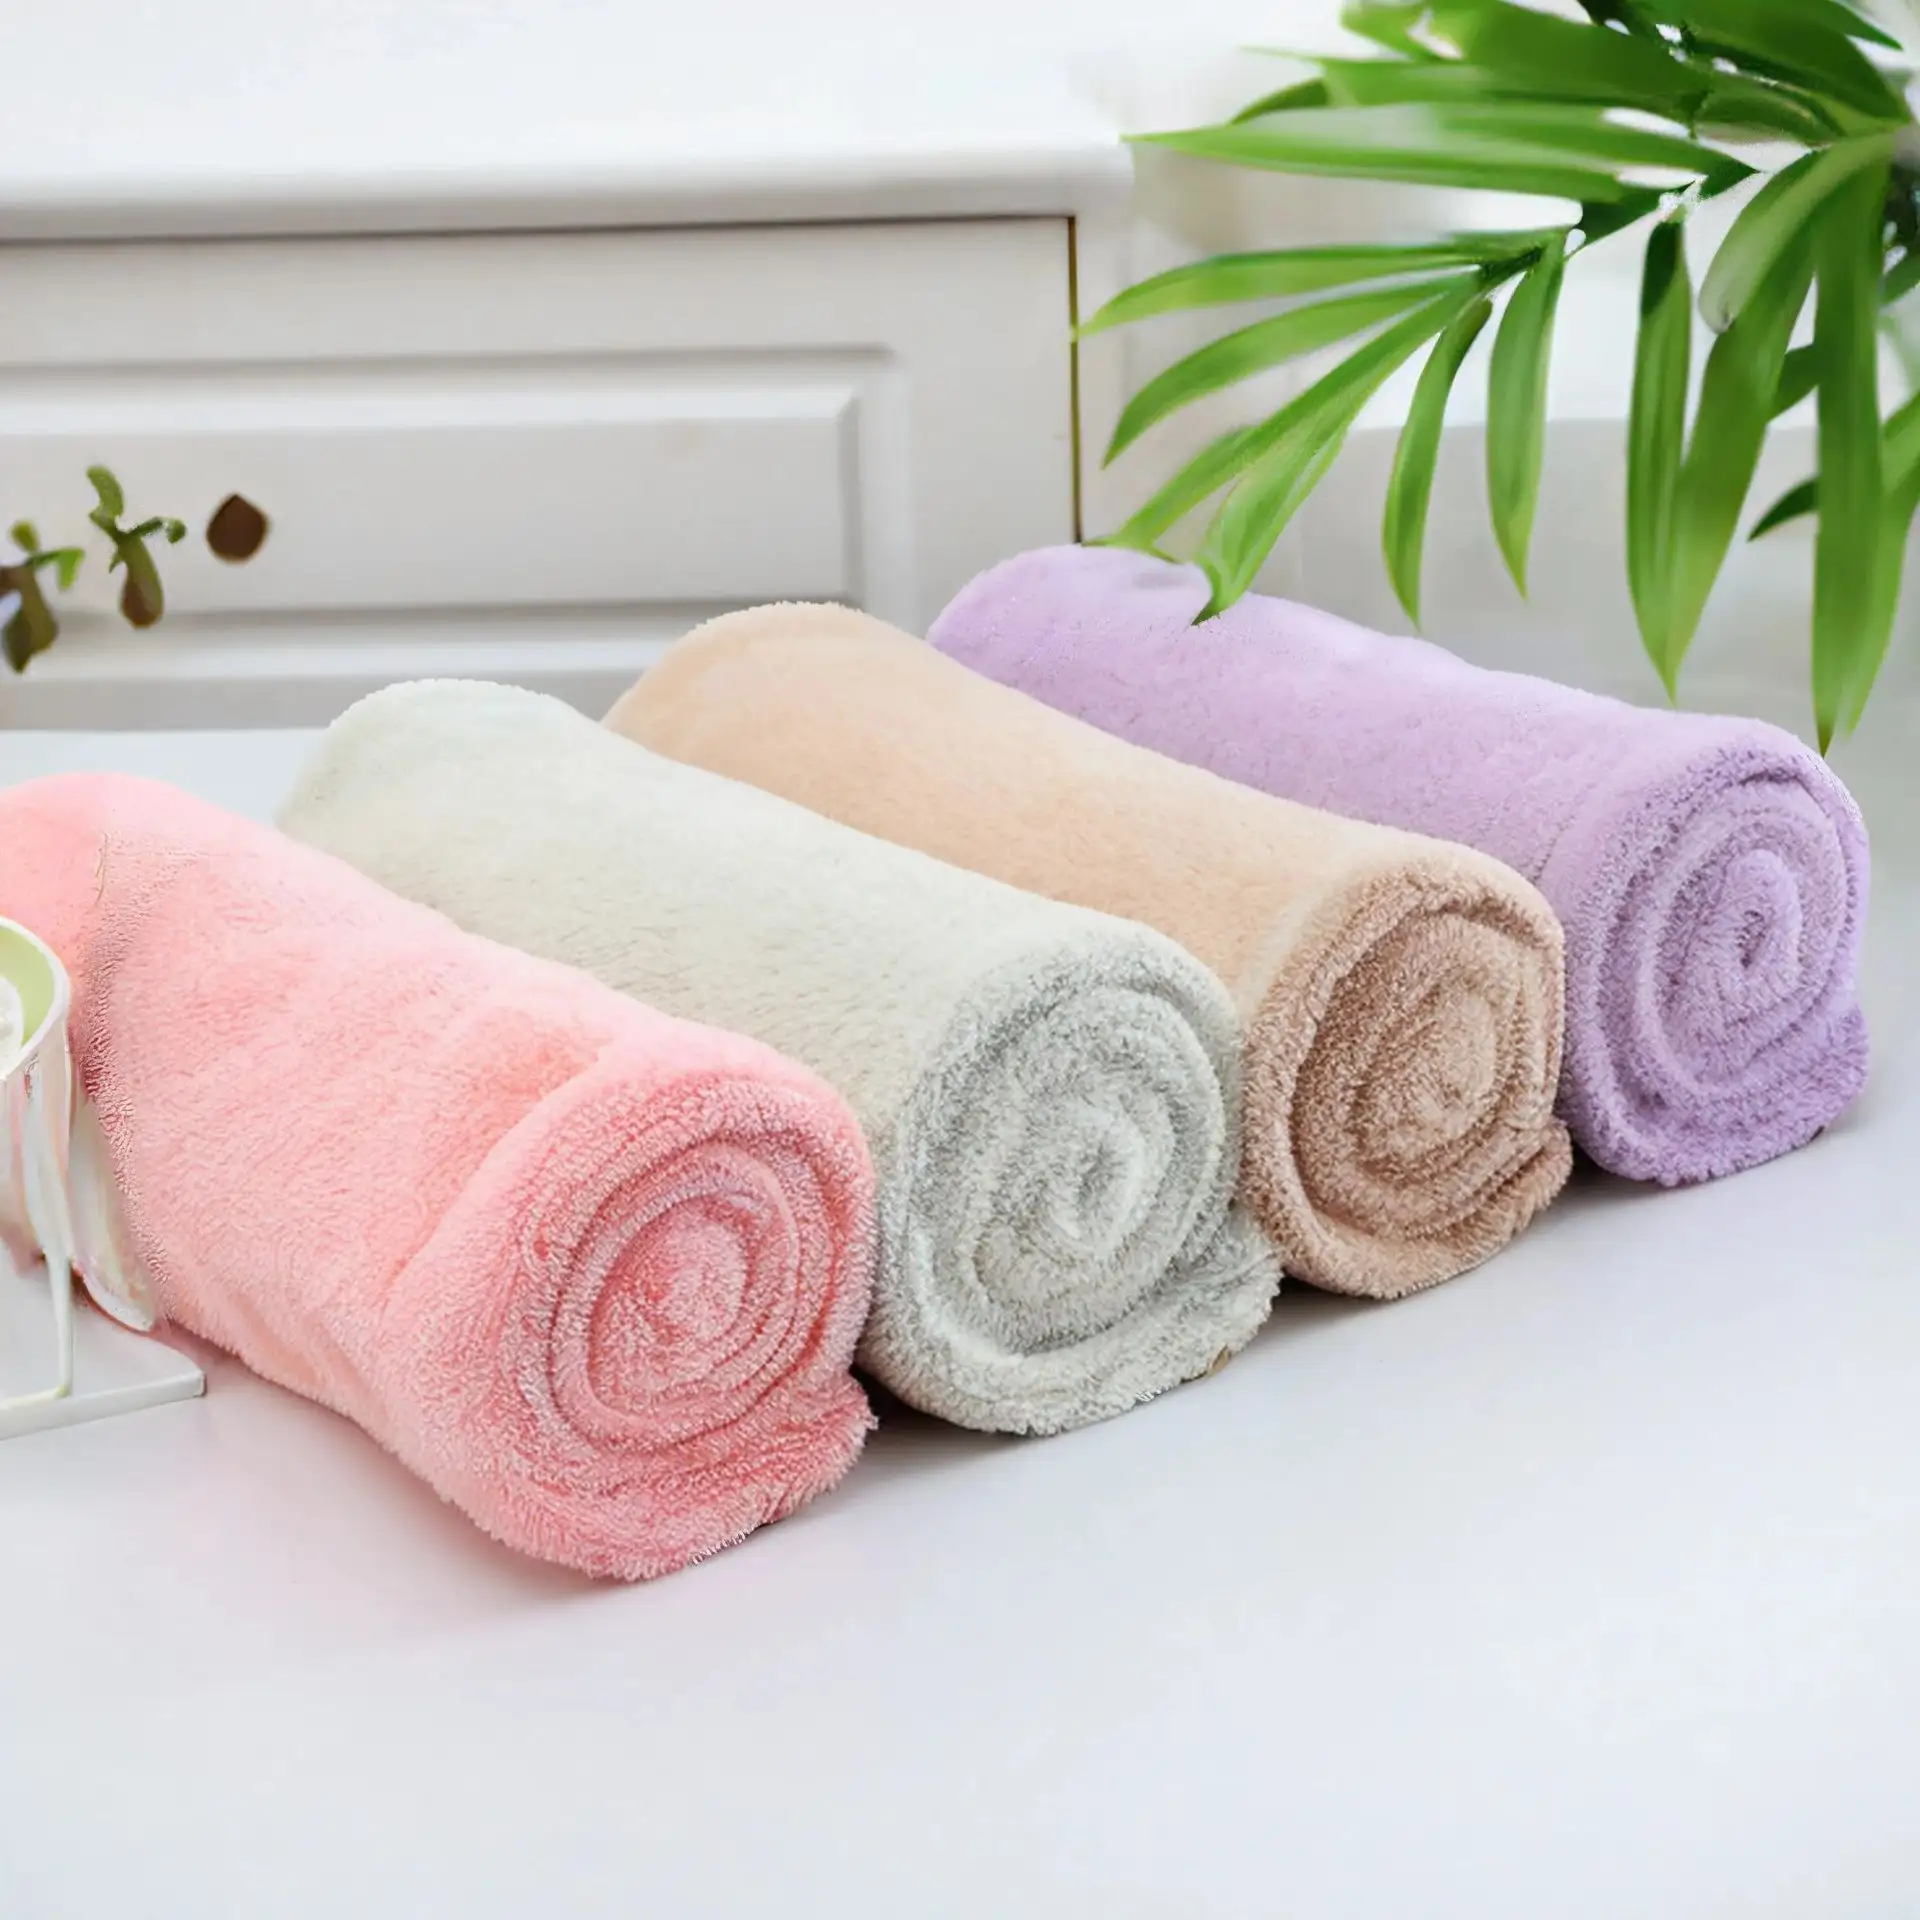 knitted washcloths coral fleece bath drying with embroidery wrap microfiber hair towel women